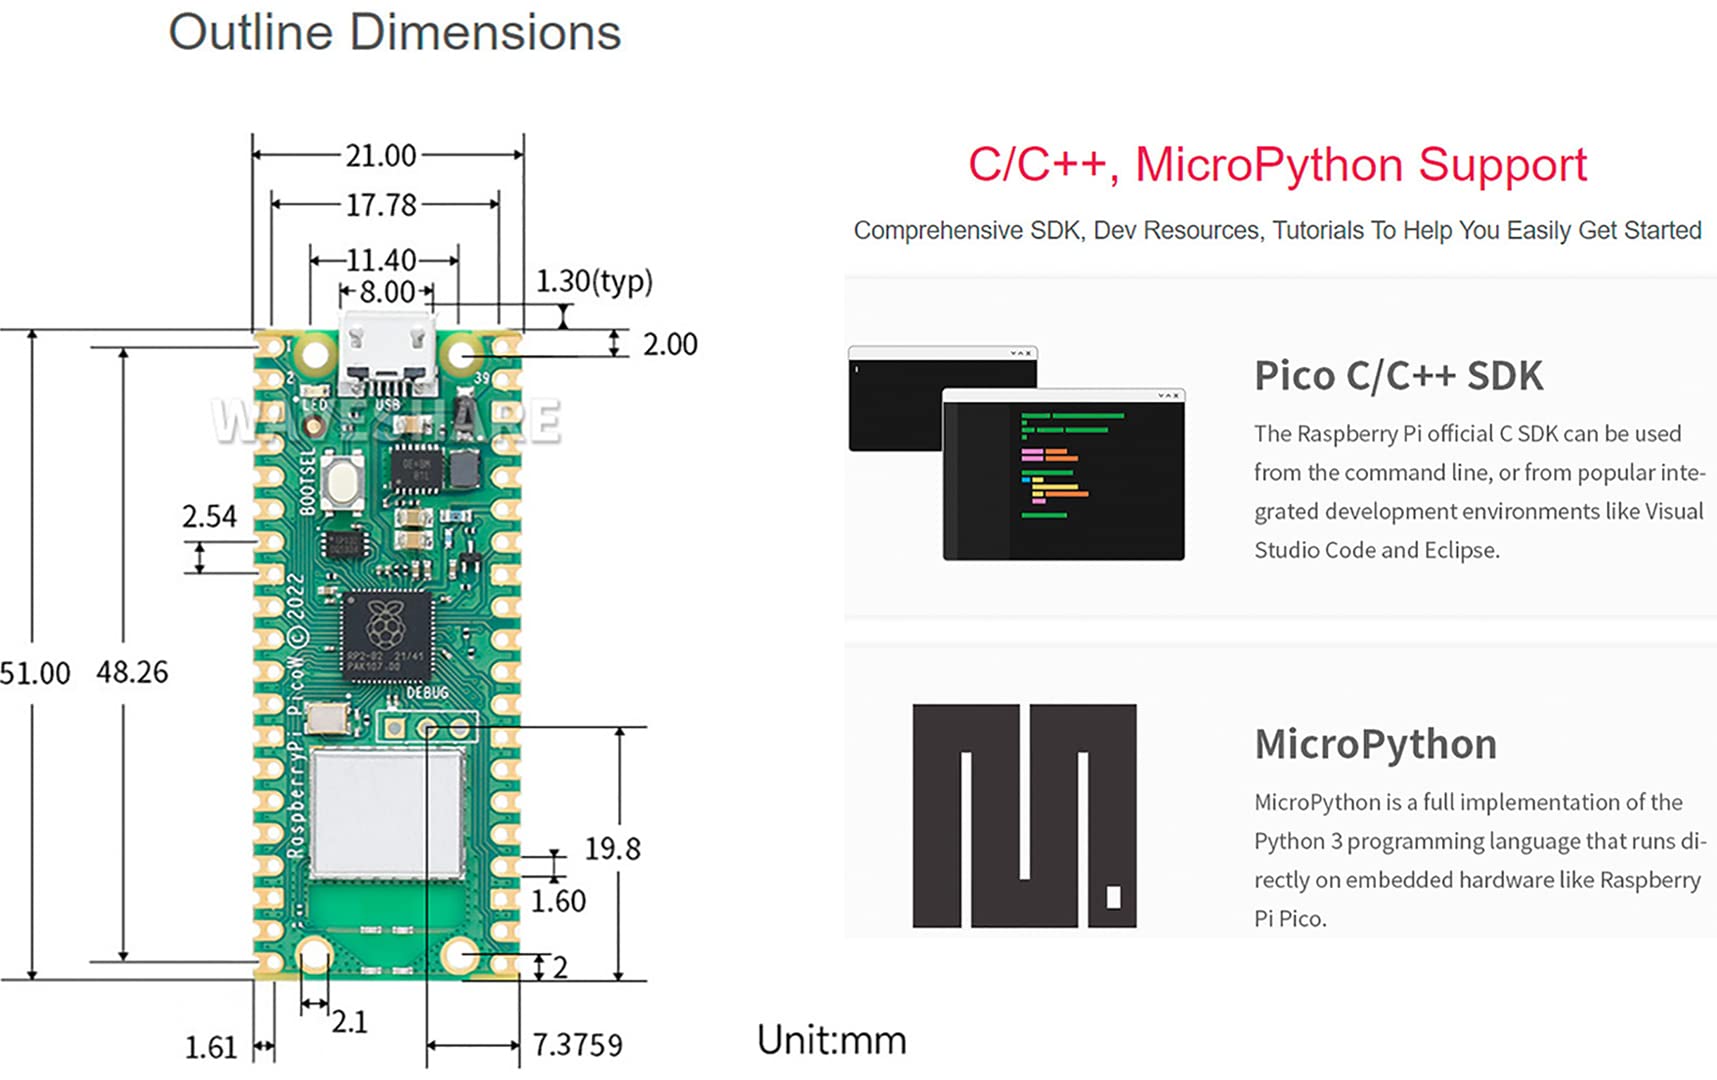 with Header Pico WH Raspberry Pi Pico W with Pre-Soldered Header, Built-in WiFi Support 2.4 GHz Band Wi-Fi 4, Based on Official RP2040 Dual-Core Arm Cortex M0+ Processor